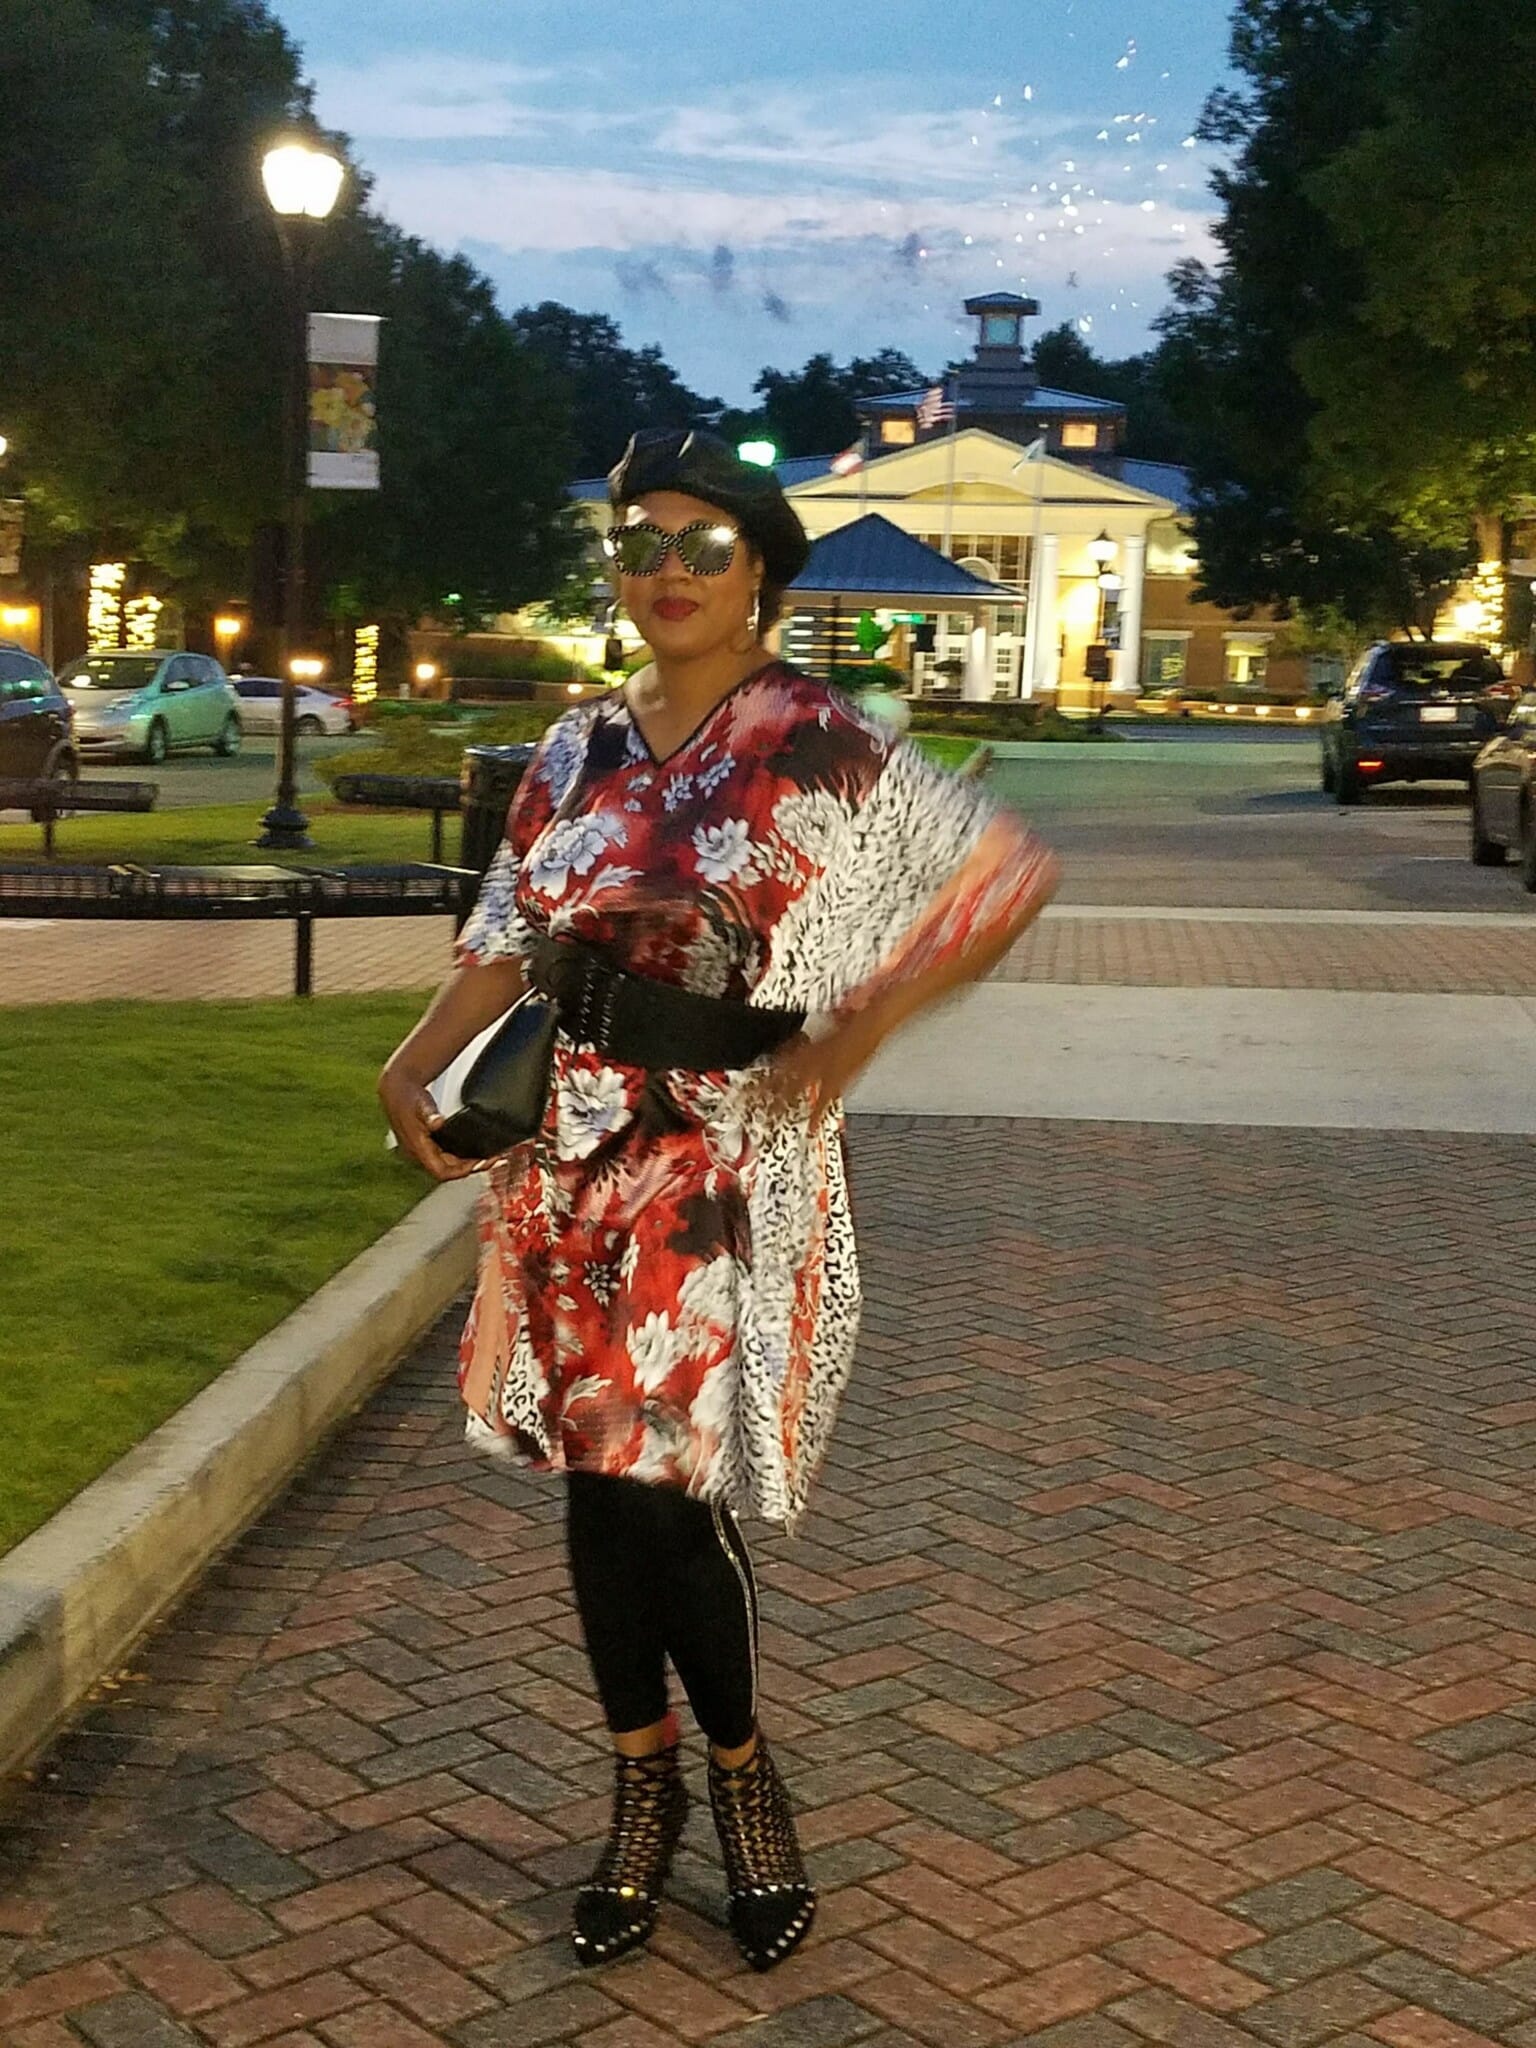 A black woman outside in a city at dusk, wearing a black beret and a red, white, and black floral caftan.